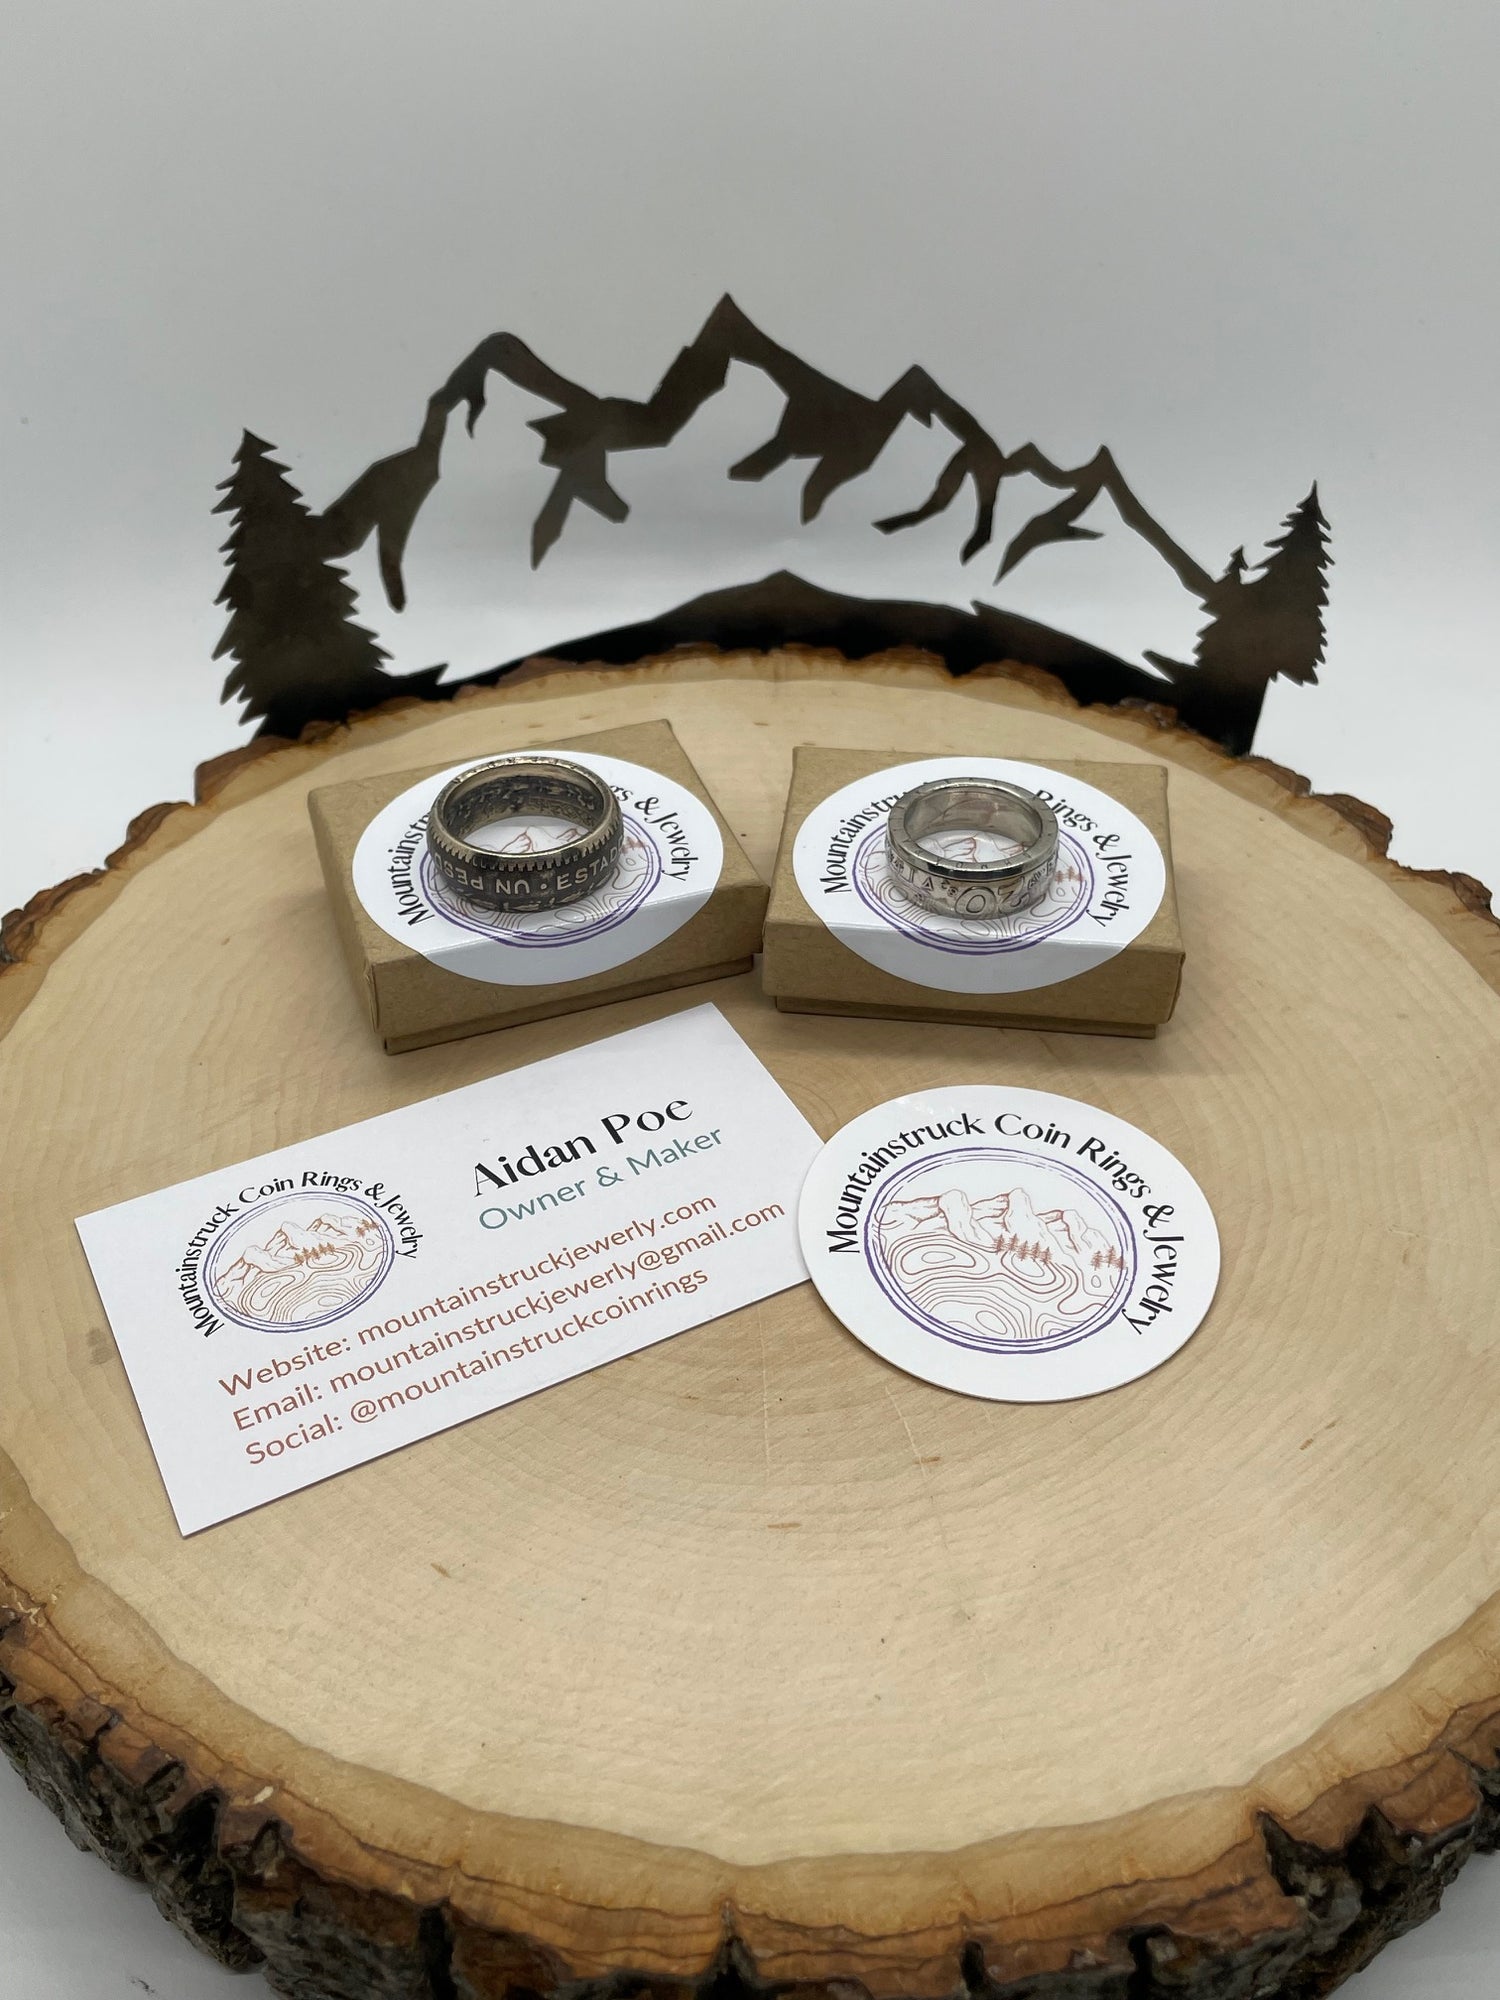 Mountainstruck Coin Rings & Jewelry business card, sticker and two small ring boxes on a thing tree stump with a metal art tree and mountain design in the background. There is a ring sitting on top of each of the boxes.